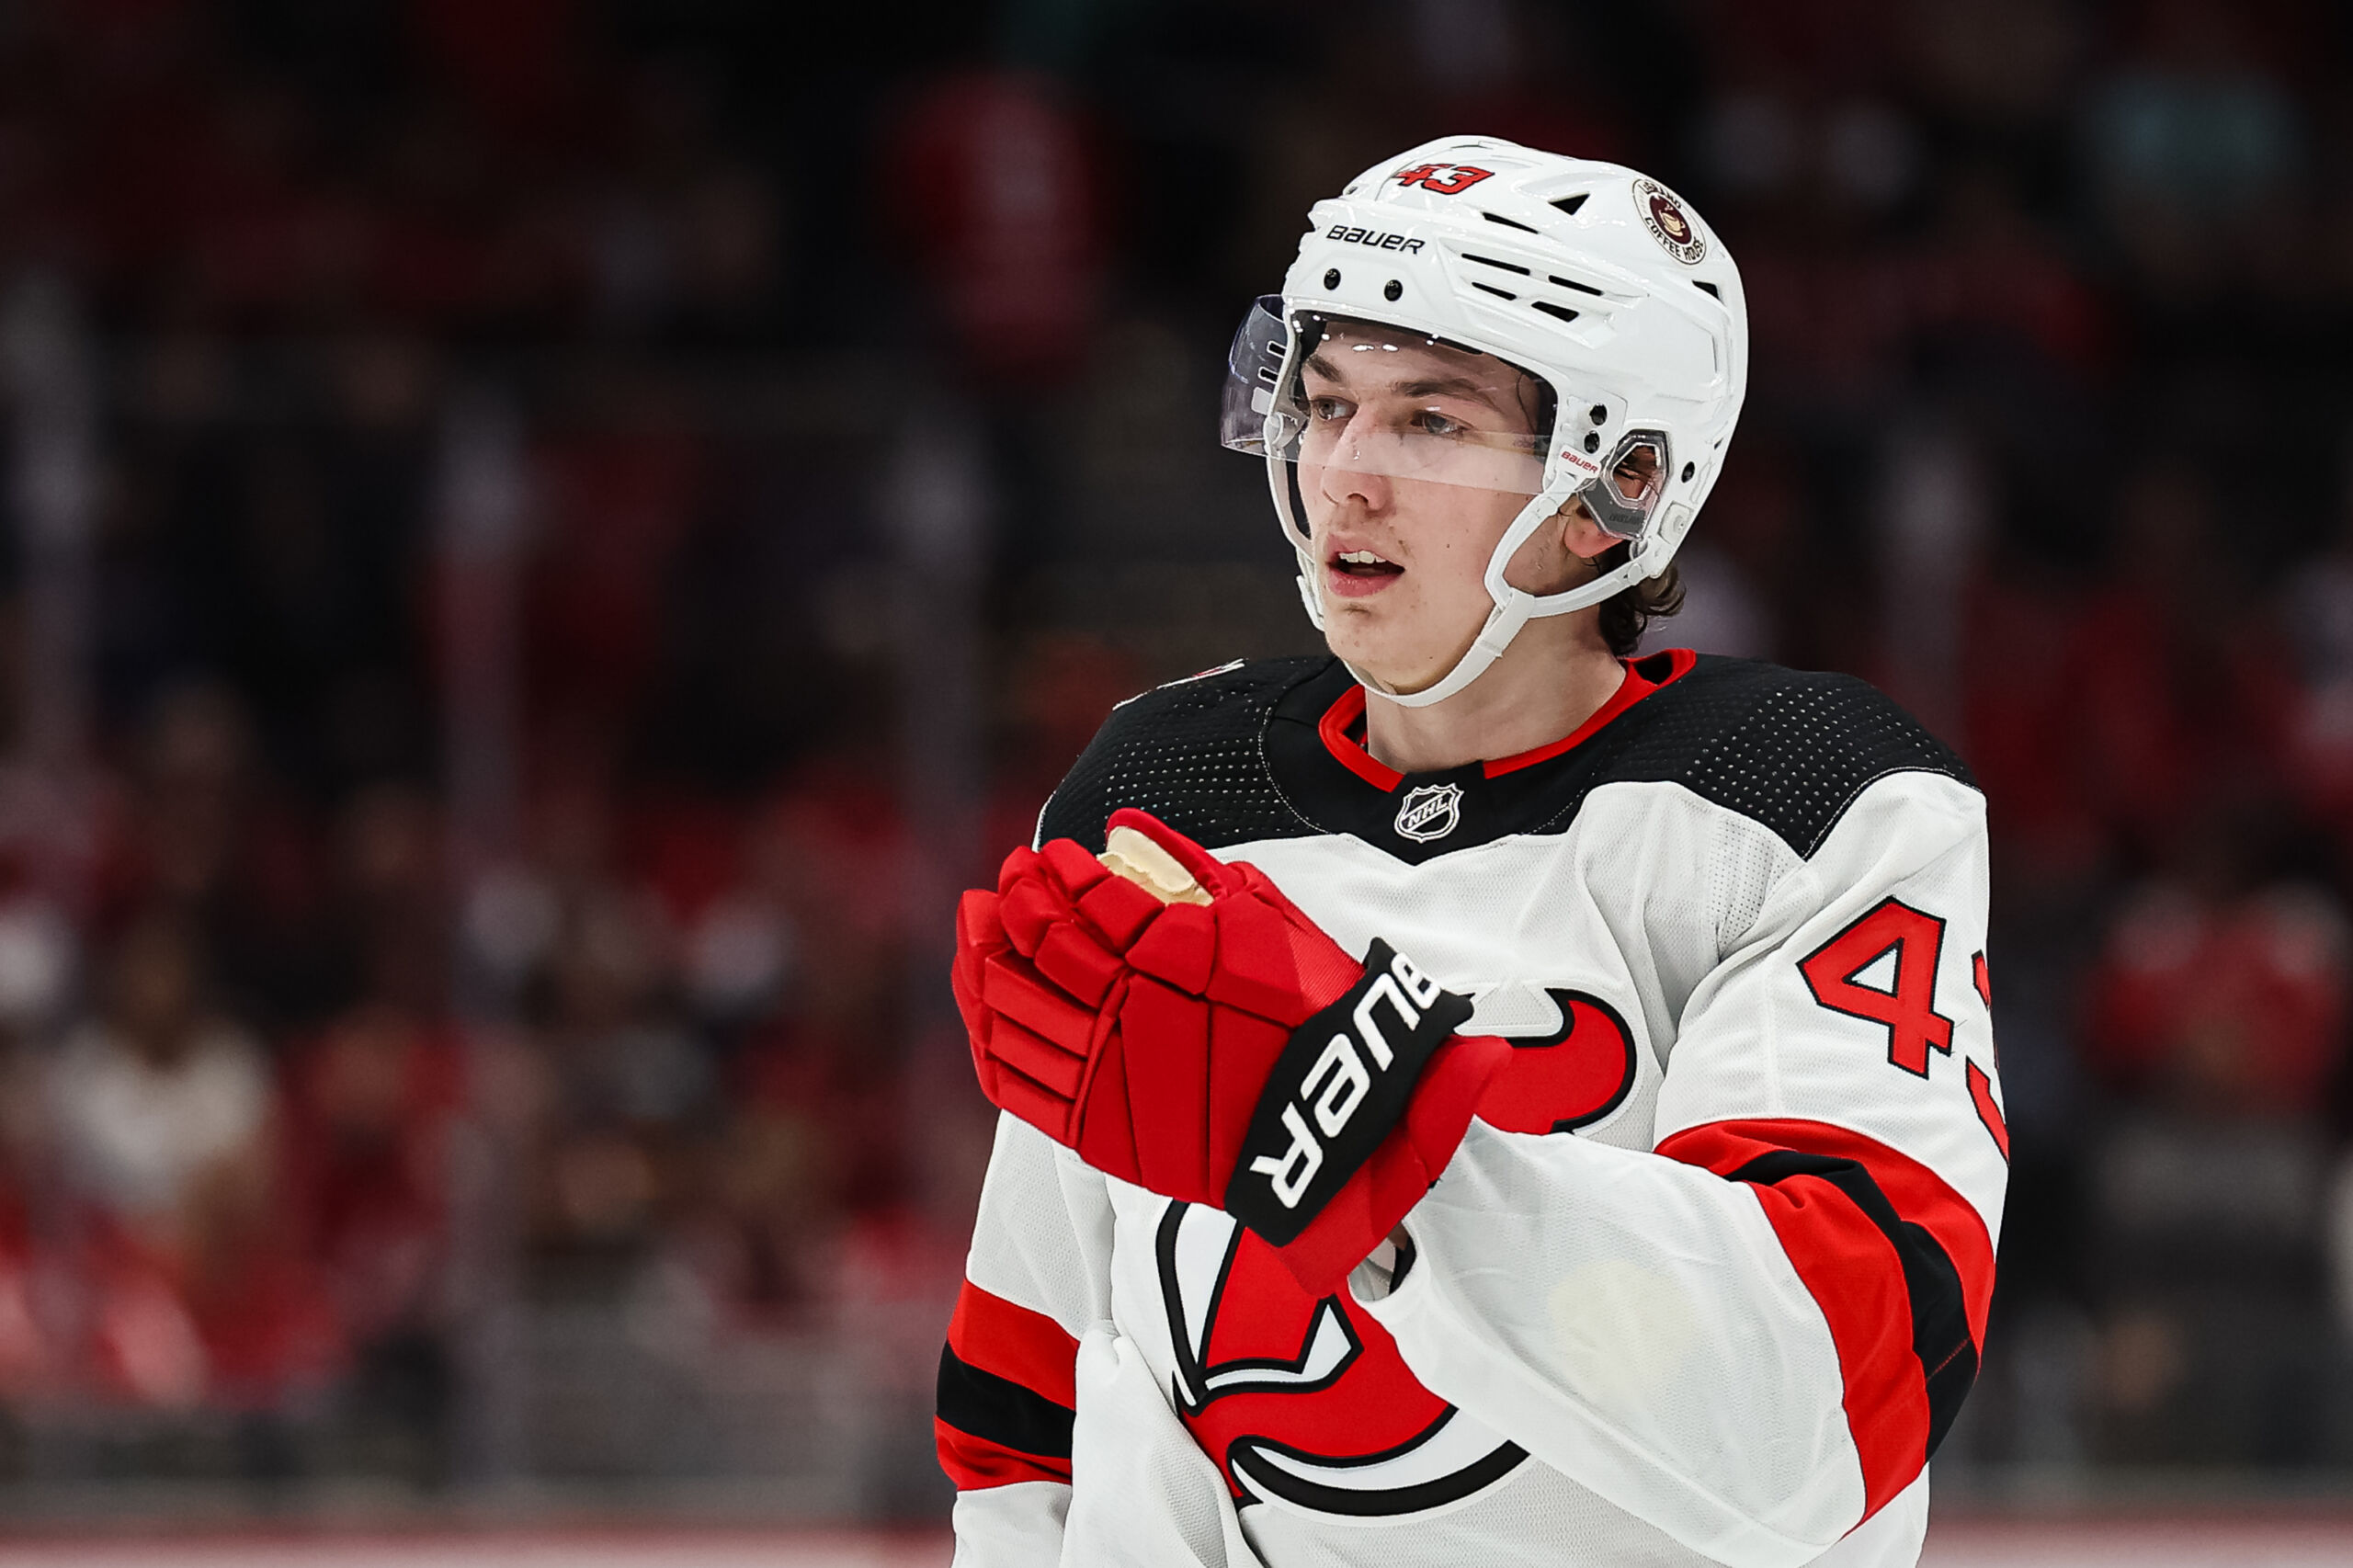 Luke Hughes made his NHL debut with the New Jersey Devils on